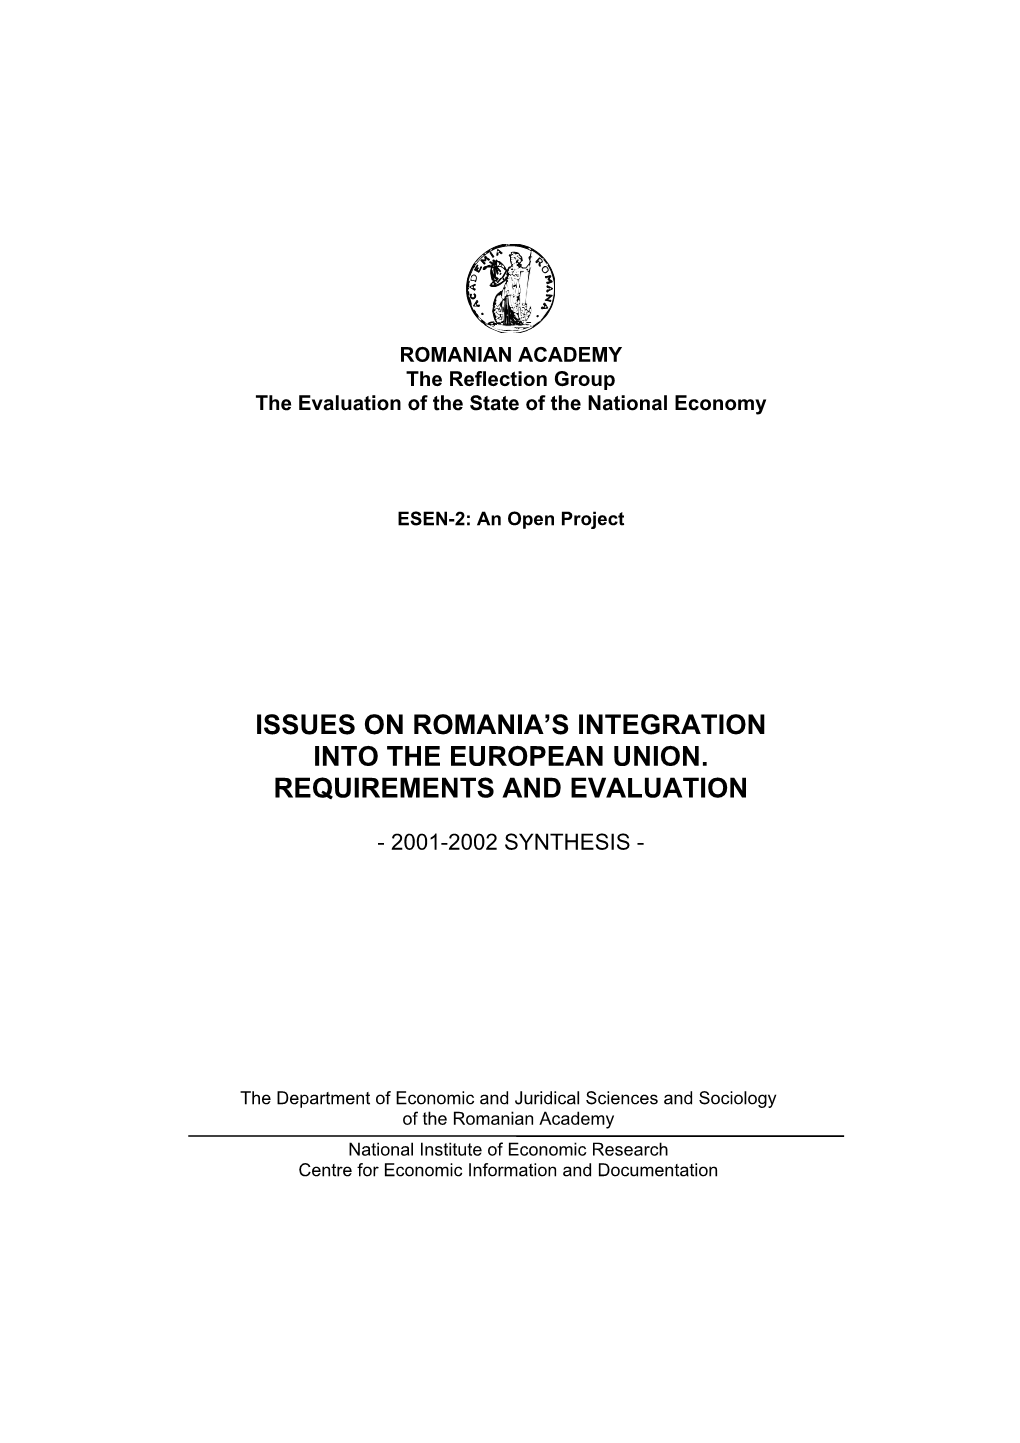 Issues on Romania's Integration Into The